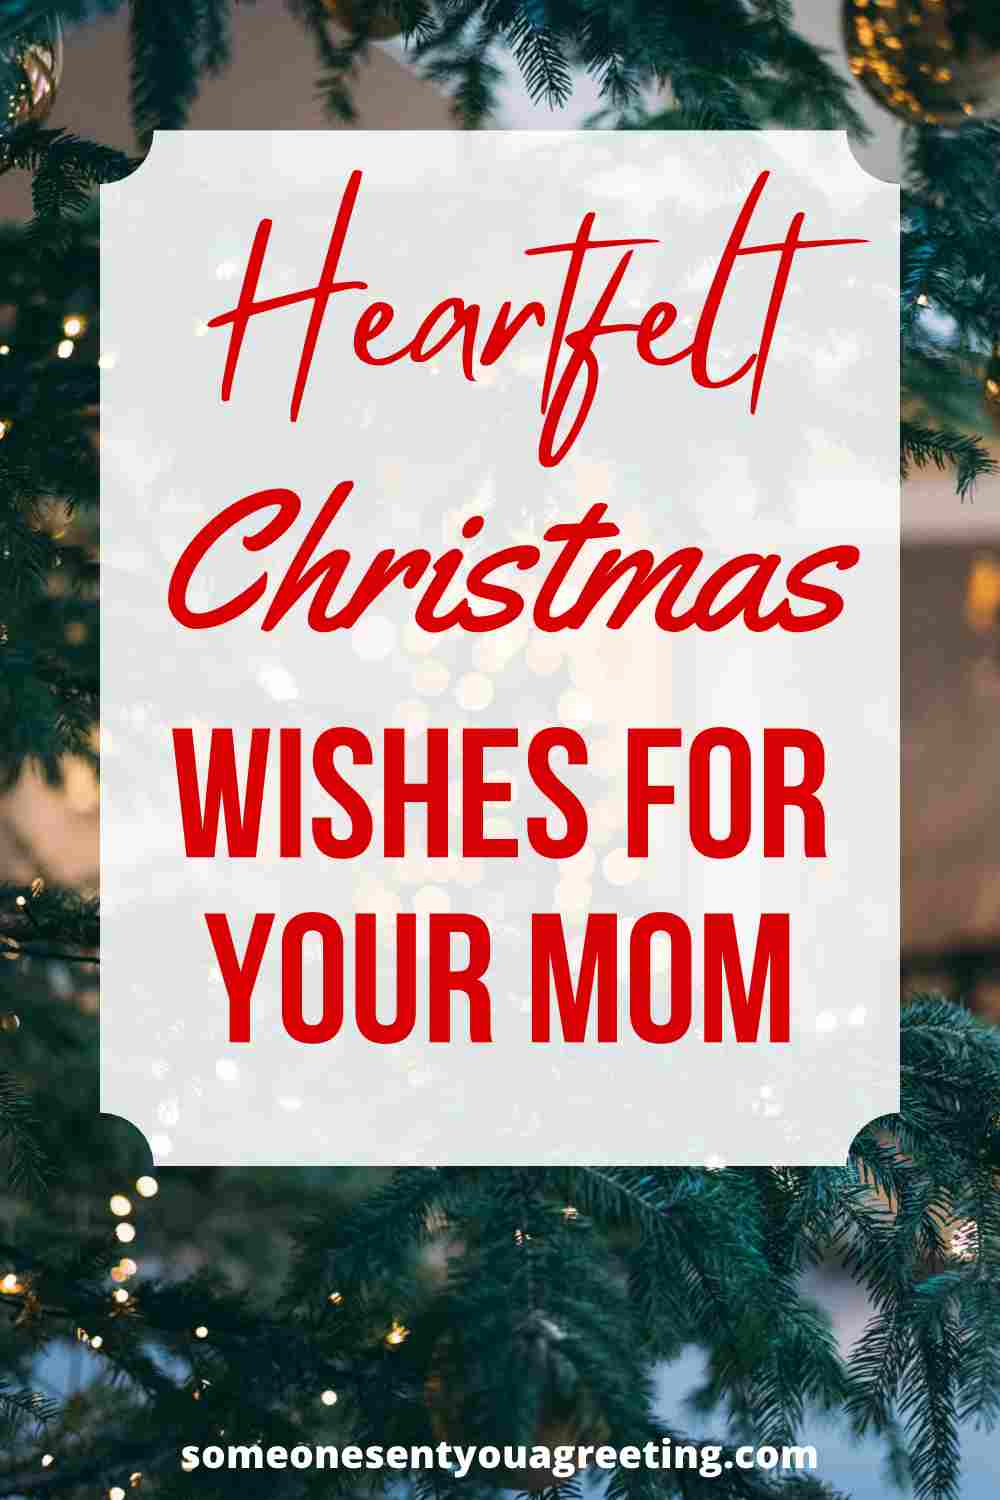 38 Heartfelt Christmas Wishes for your Mom - Someone Sent You A Greeting